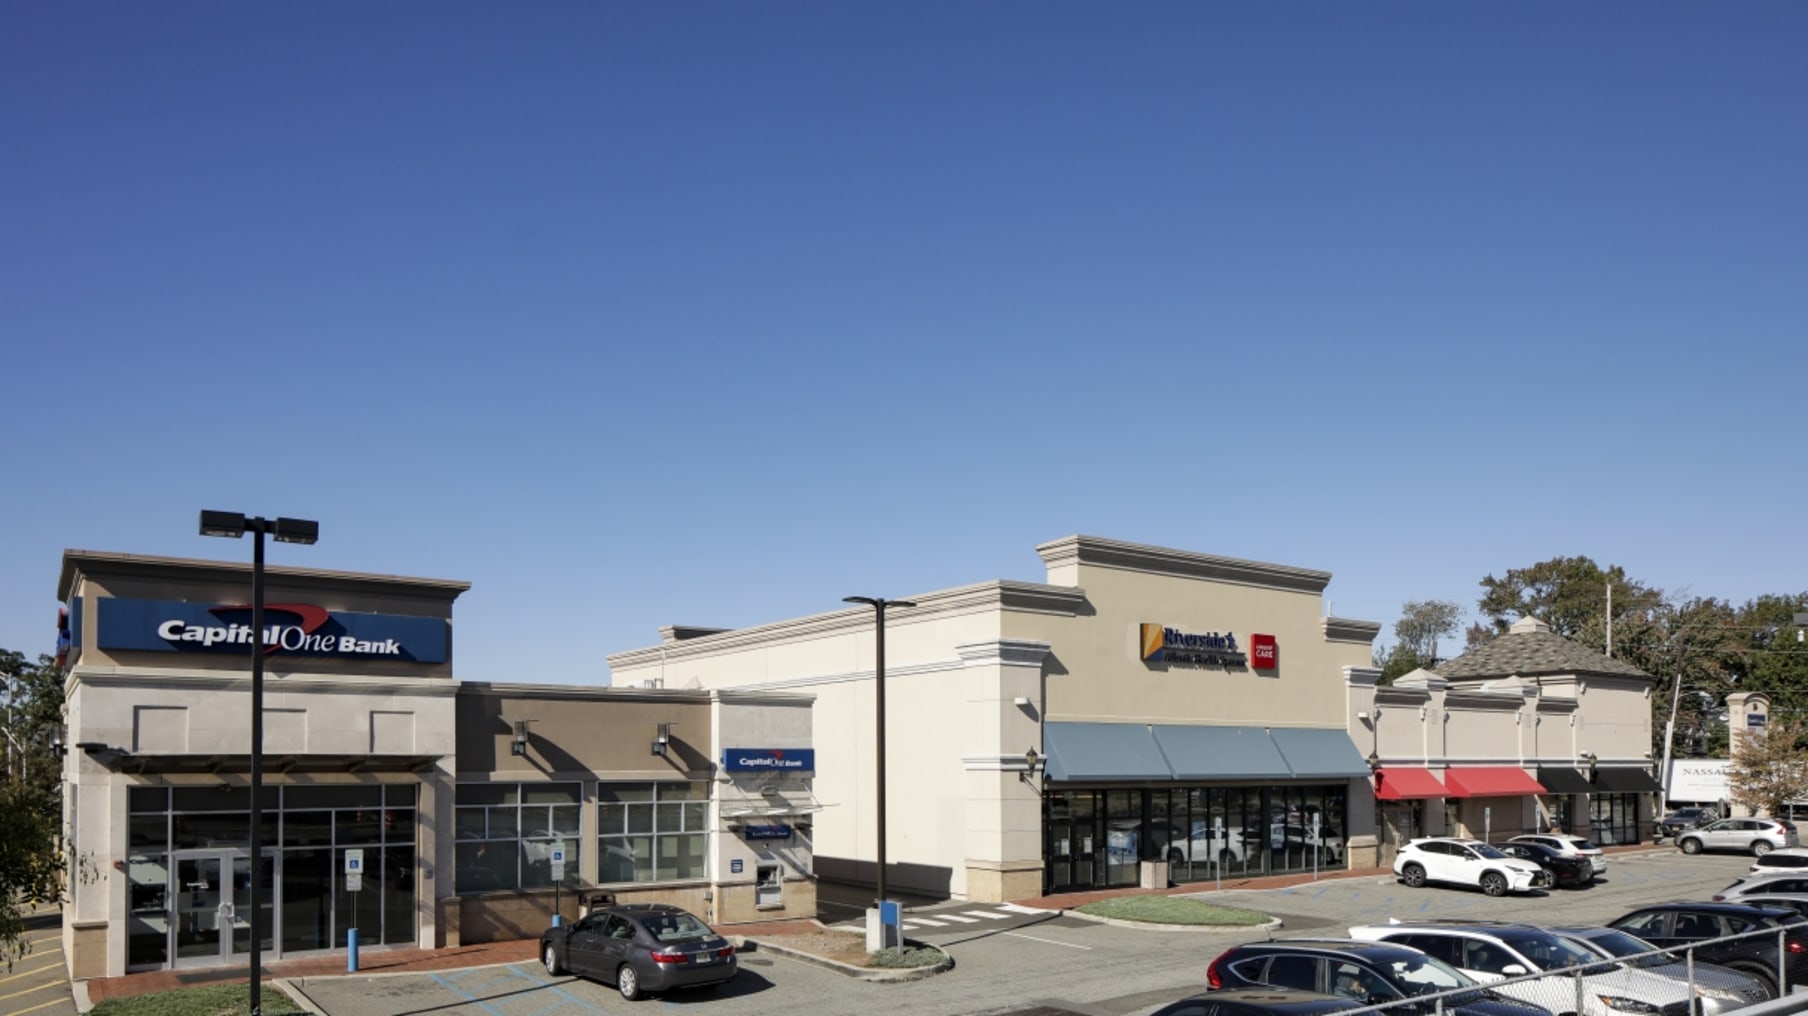 Paramus Park Mall is your #1 Shopping Destination in Bergen County